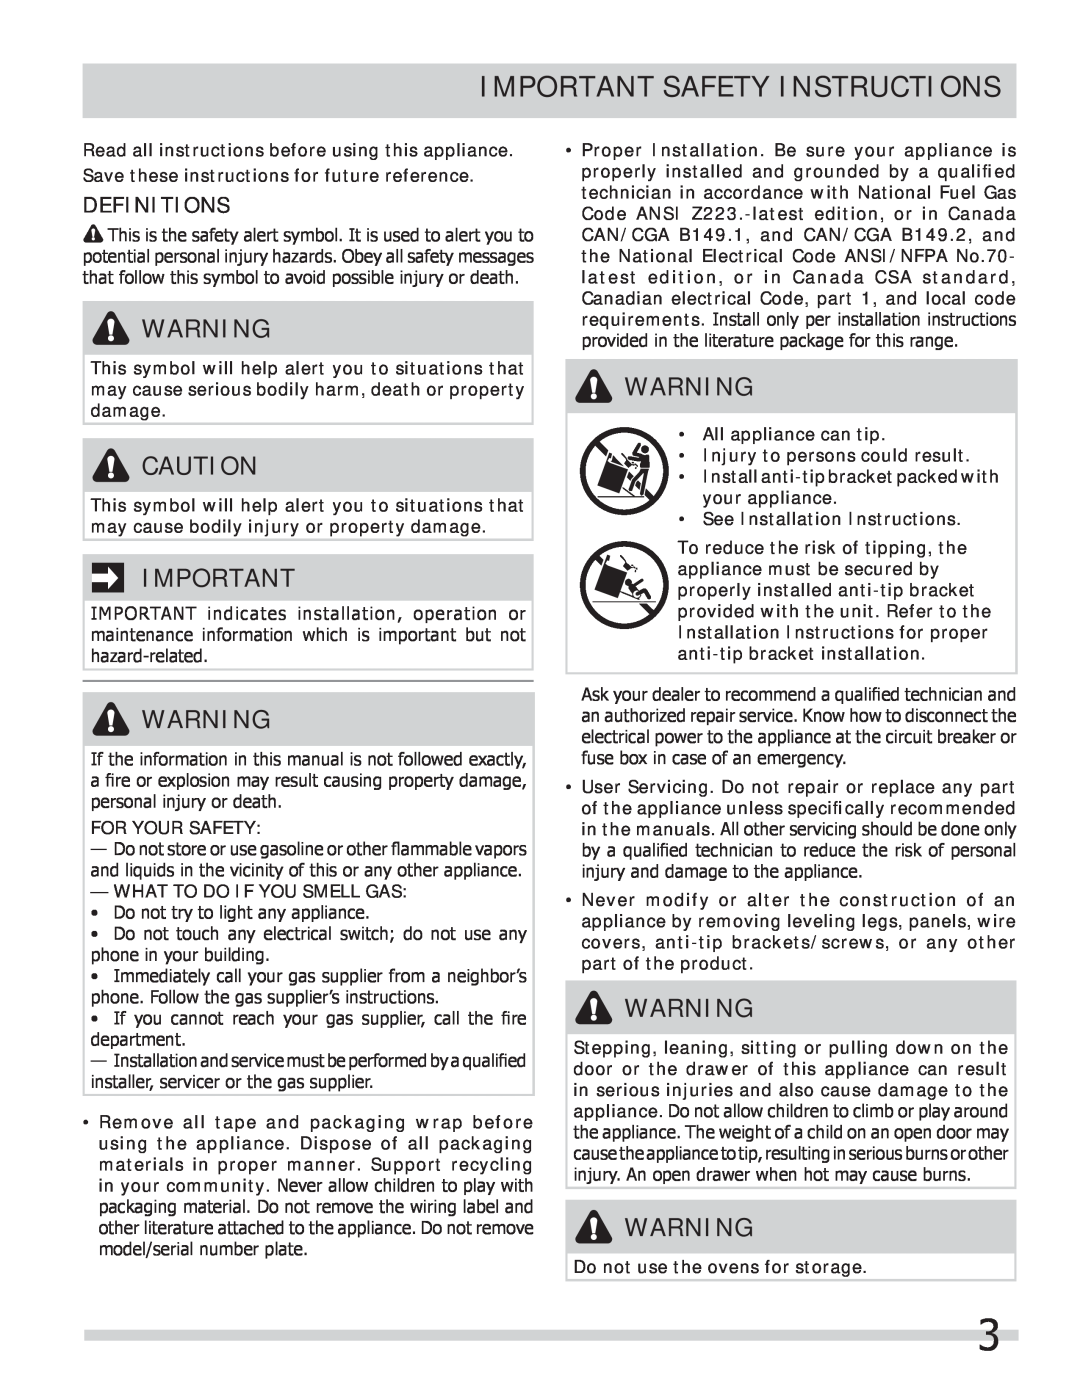 Frigidaire 318205258 important safety instructions Important Safety Instructions, Definitions 